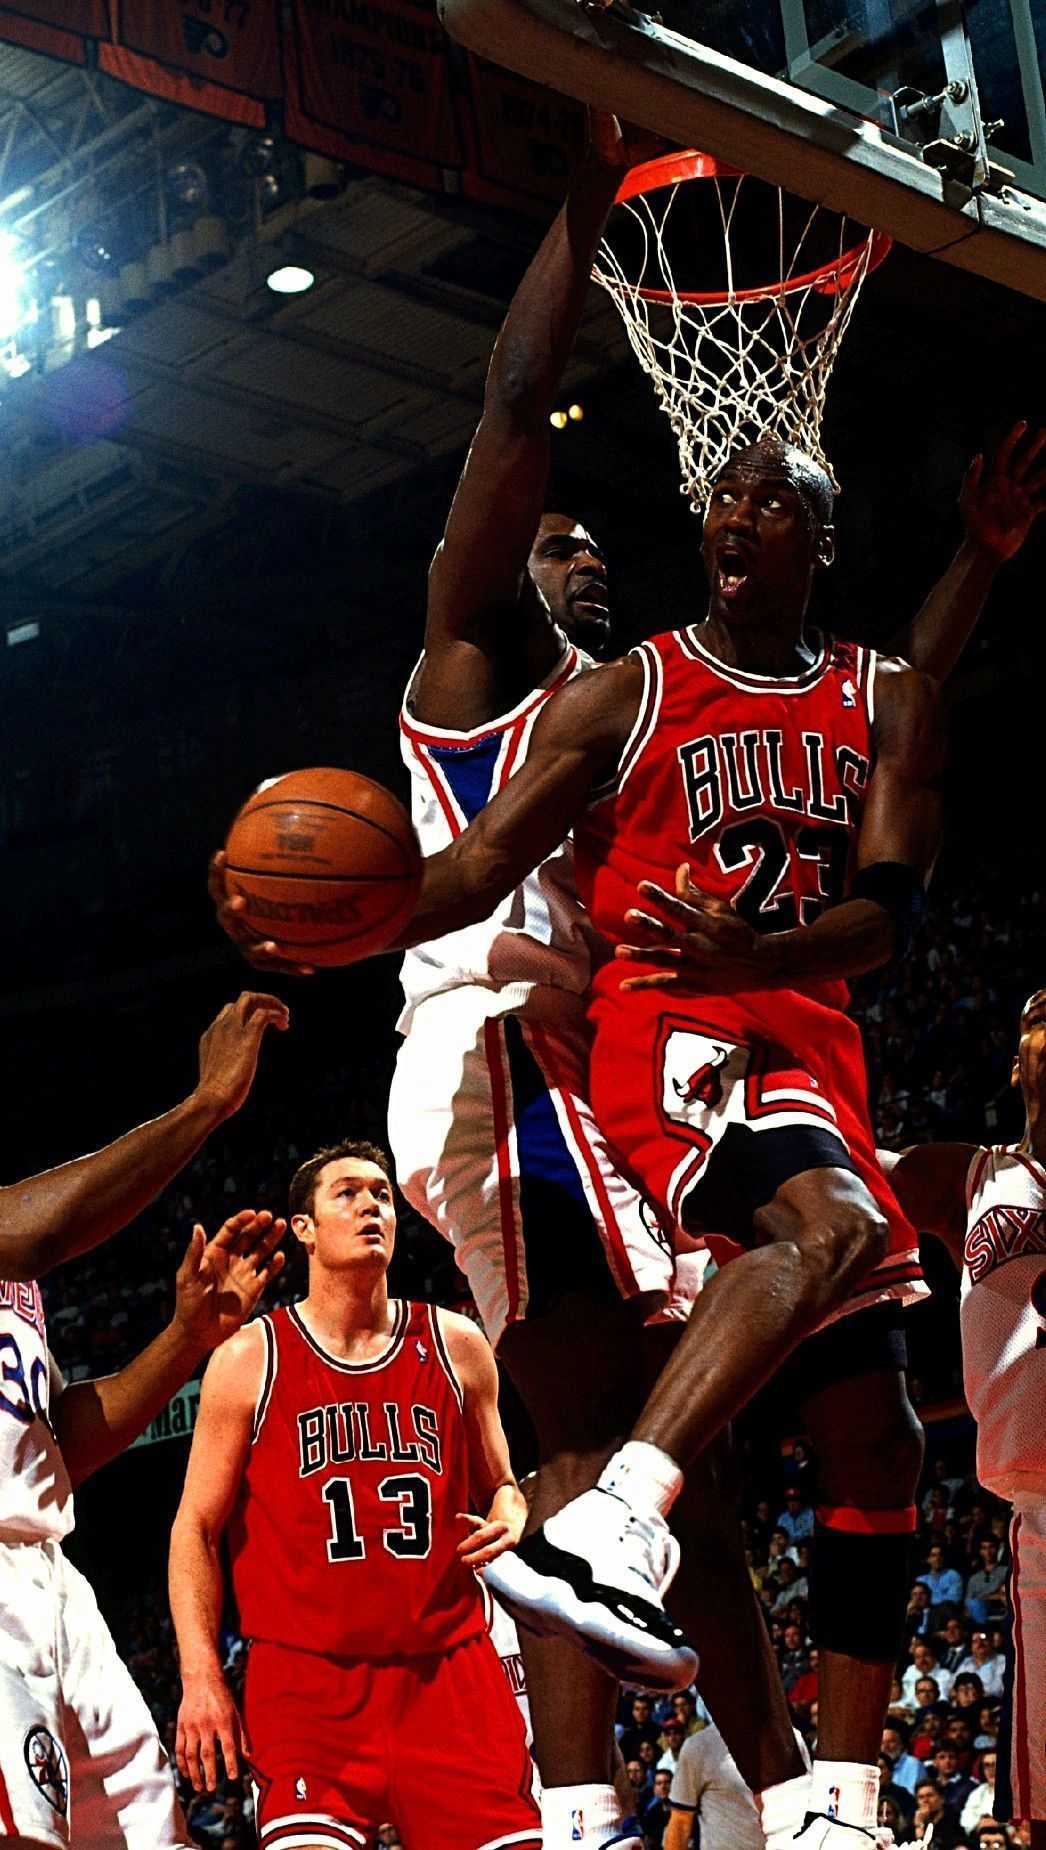 Jordan is in the air with the ball in his hand, attempting to pass the ball to teammate. - Michael Jordan